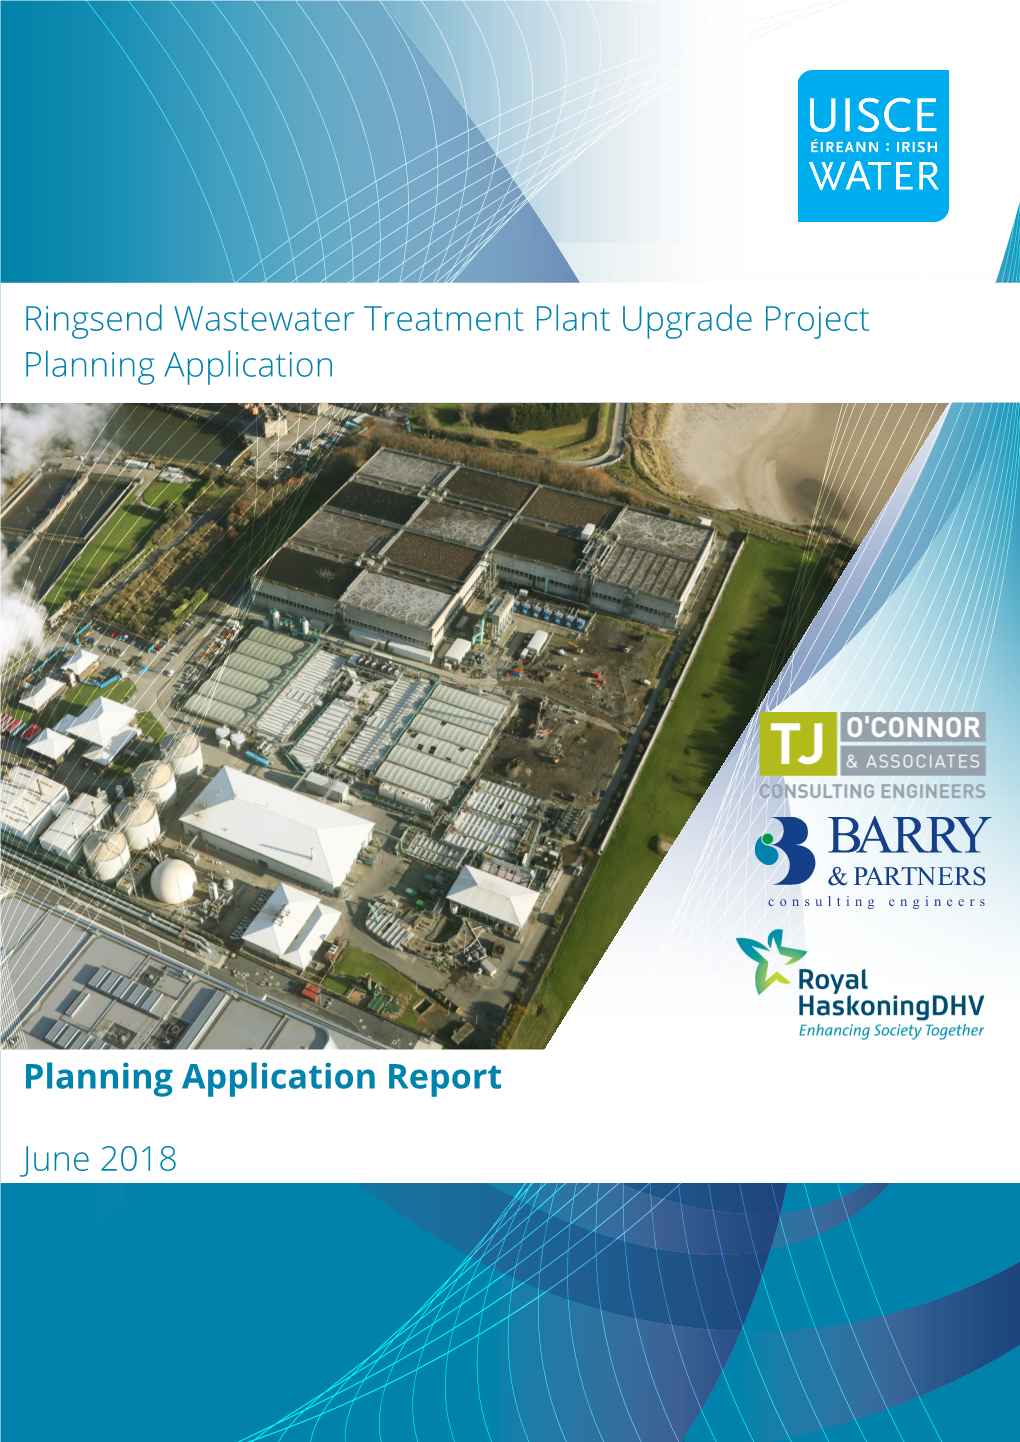 Ringsend Wastewater Treatment Plant Upgrade Project Planning Application